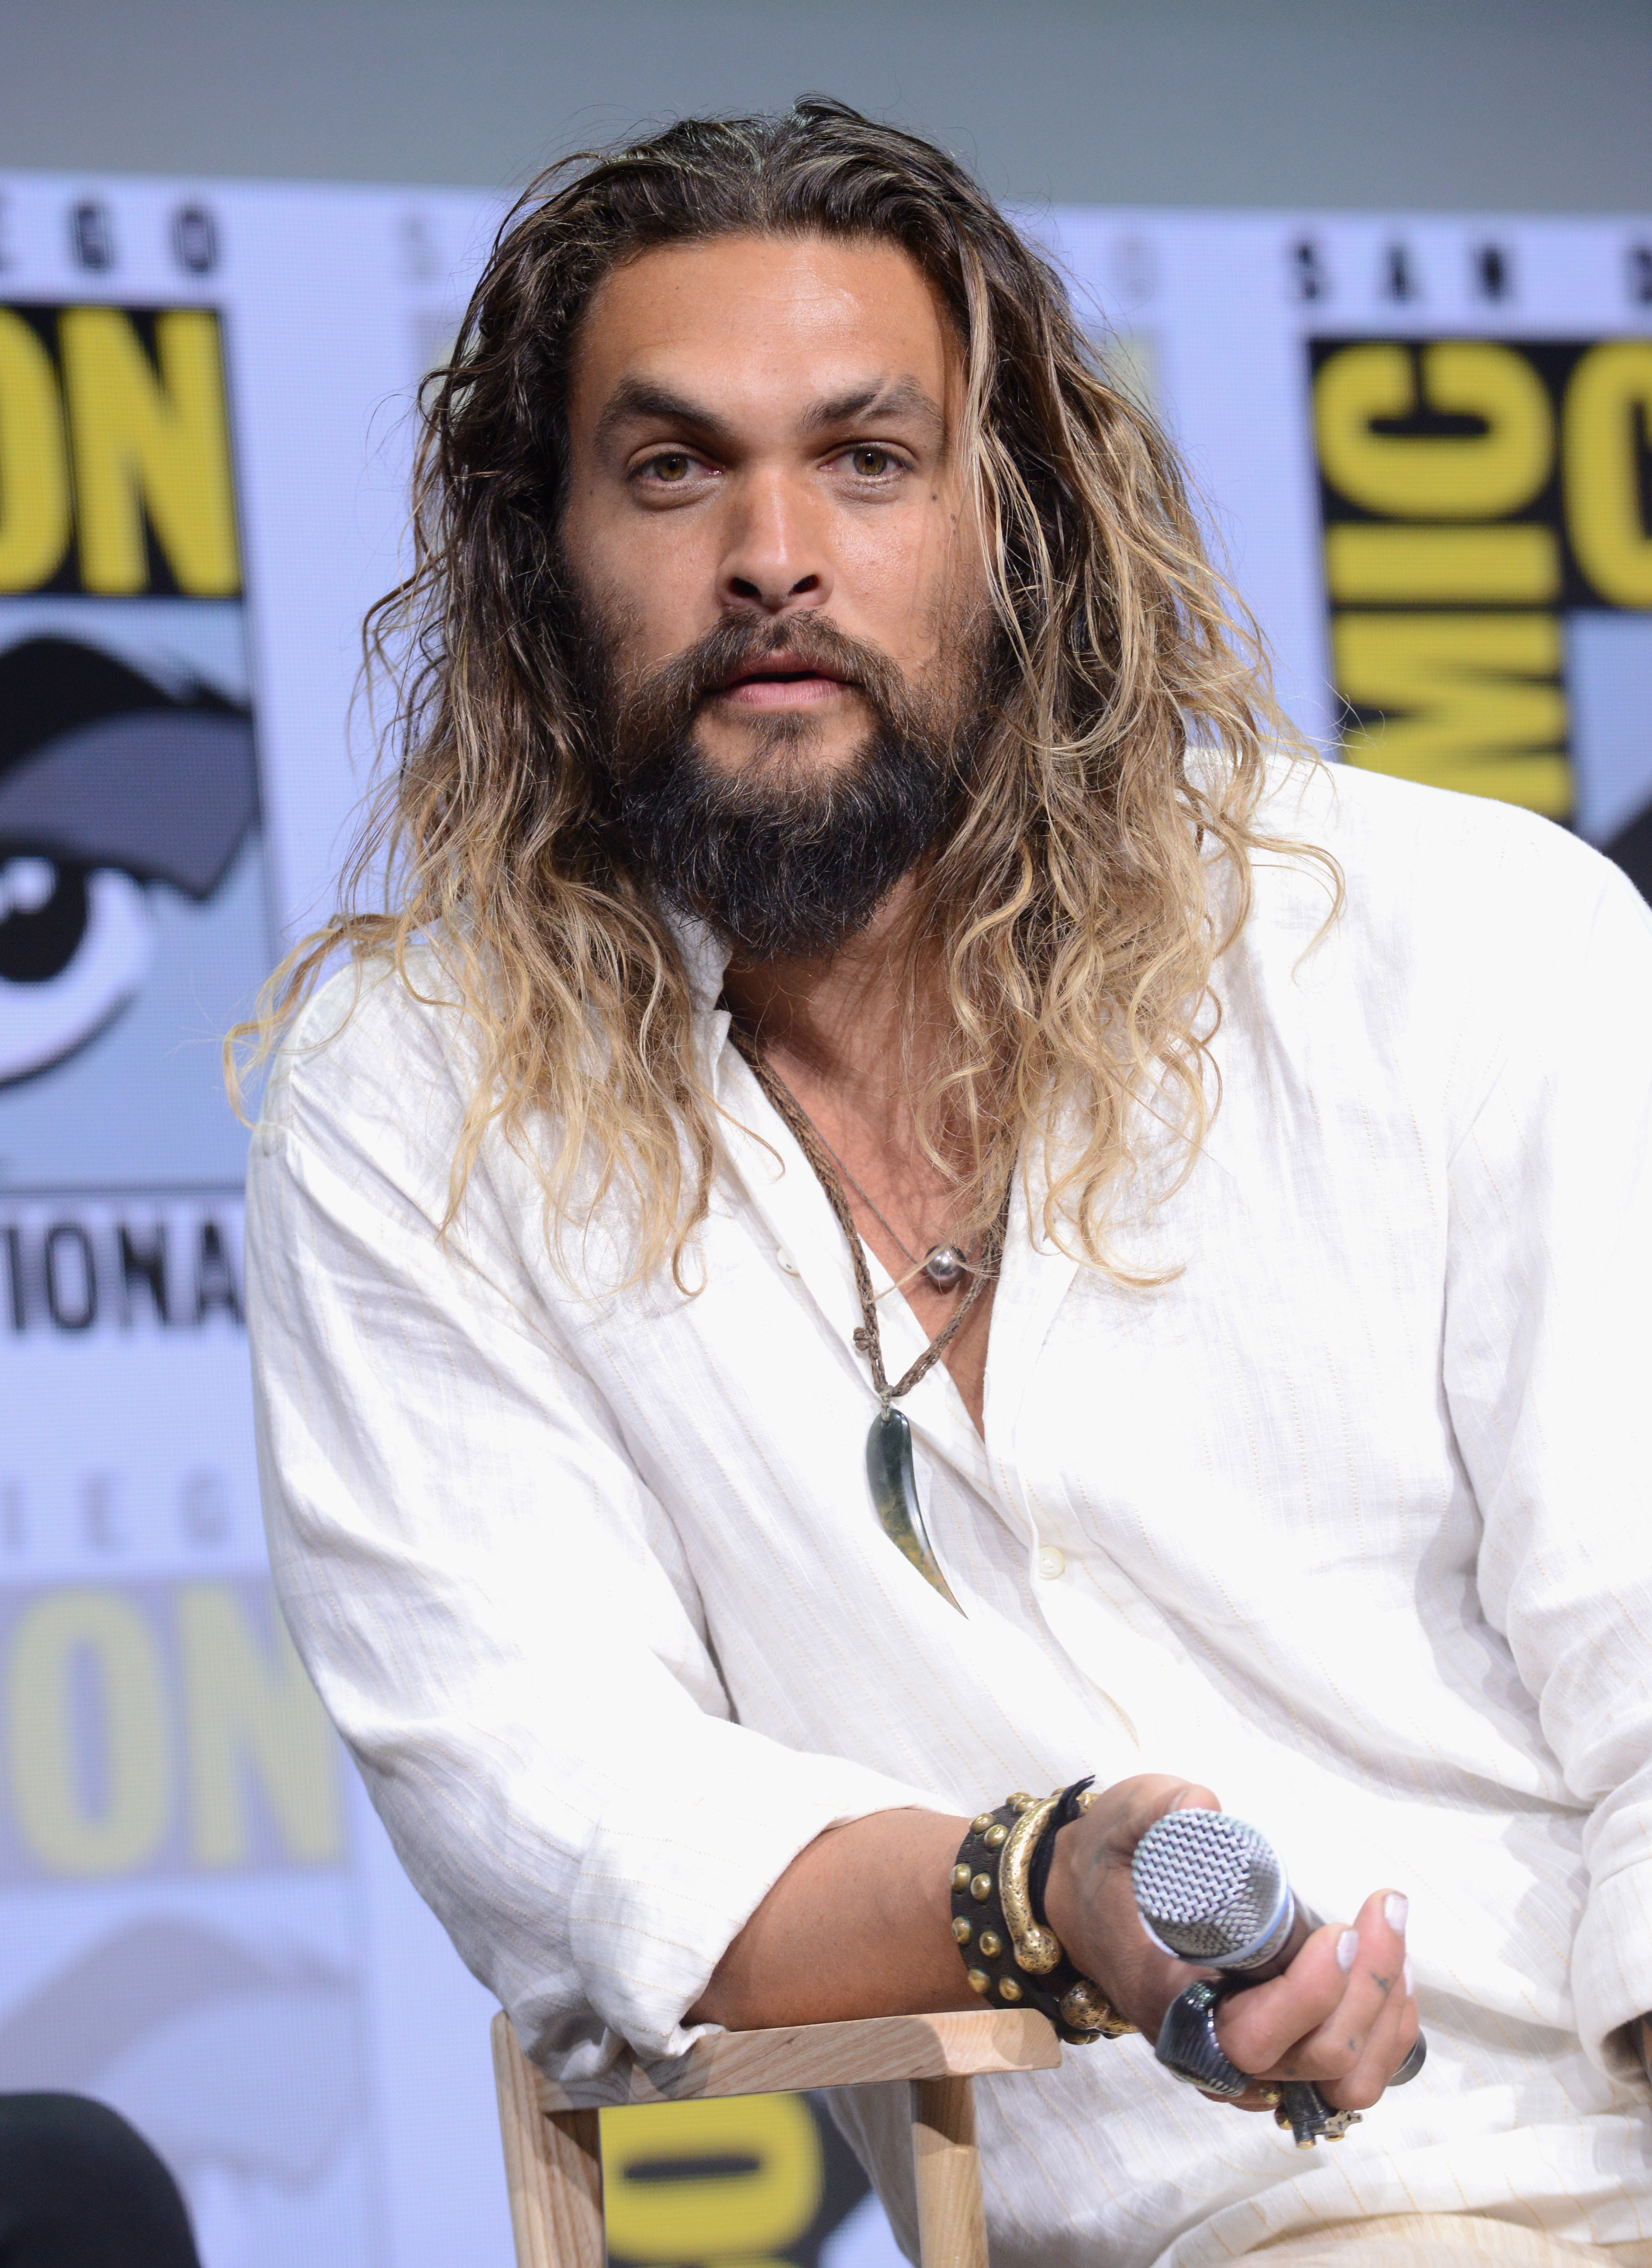 Jason Momoa attends the "Justice League" presentation during Comic-Con International 2017 on July 22, 2017 in San Diego, California | Source: Getty Images